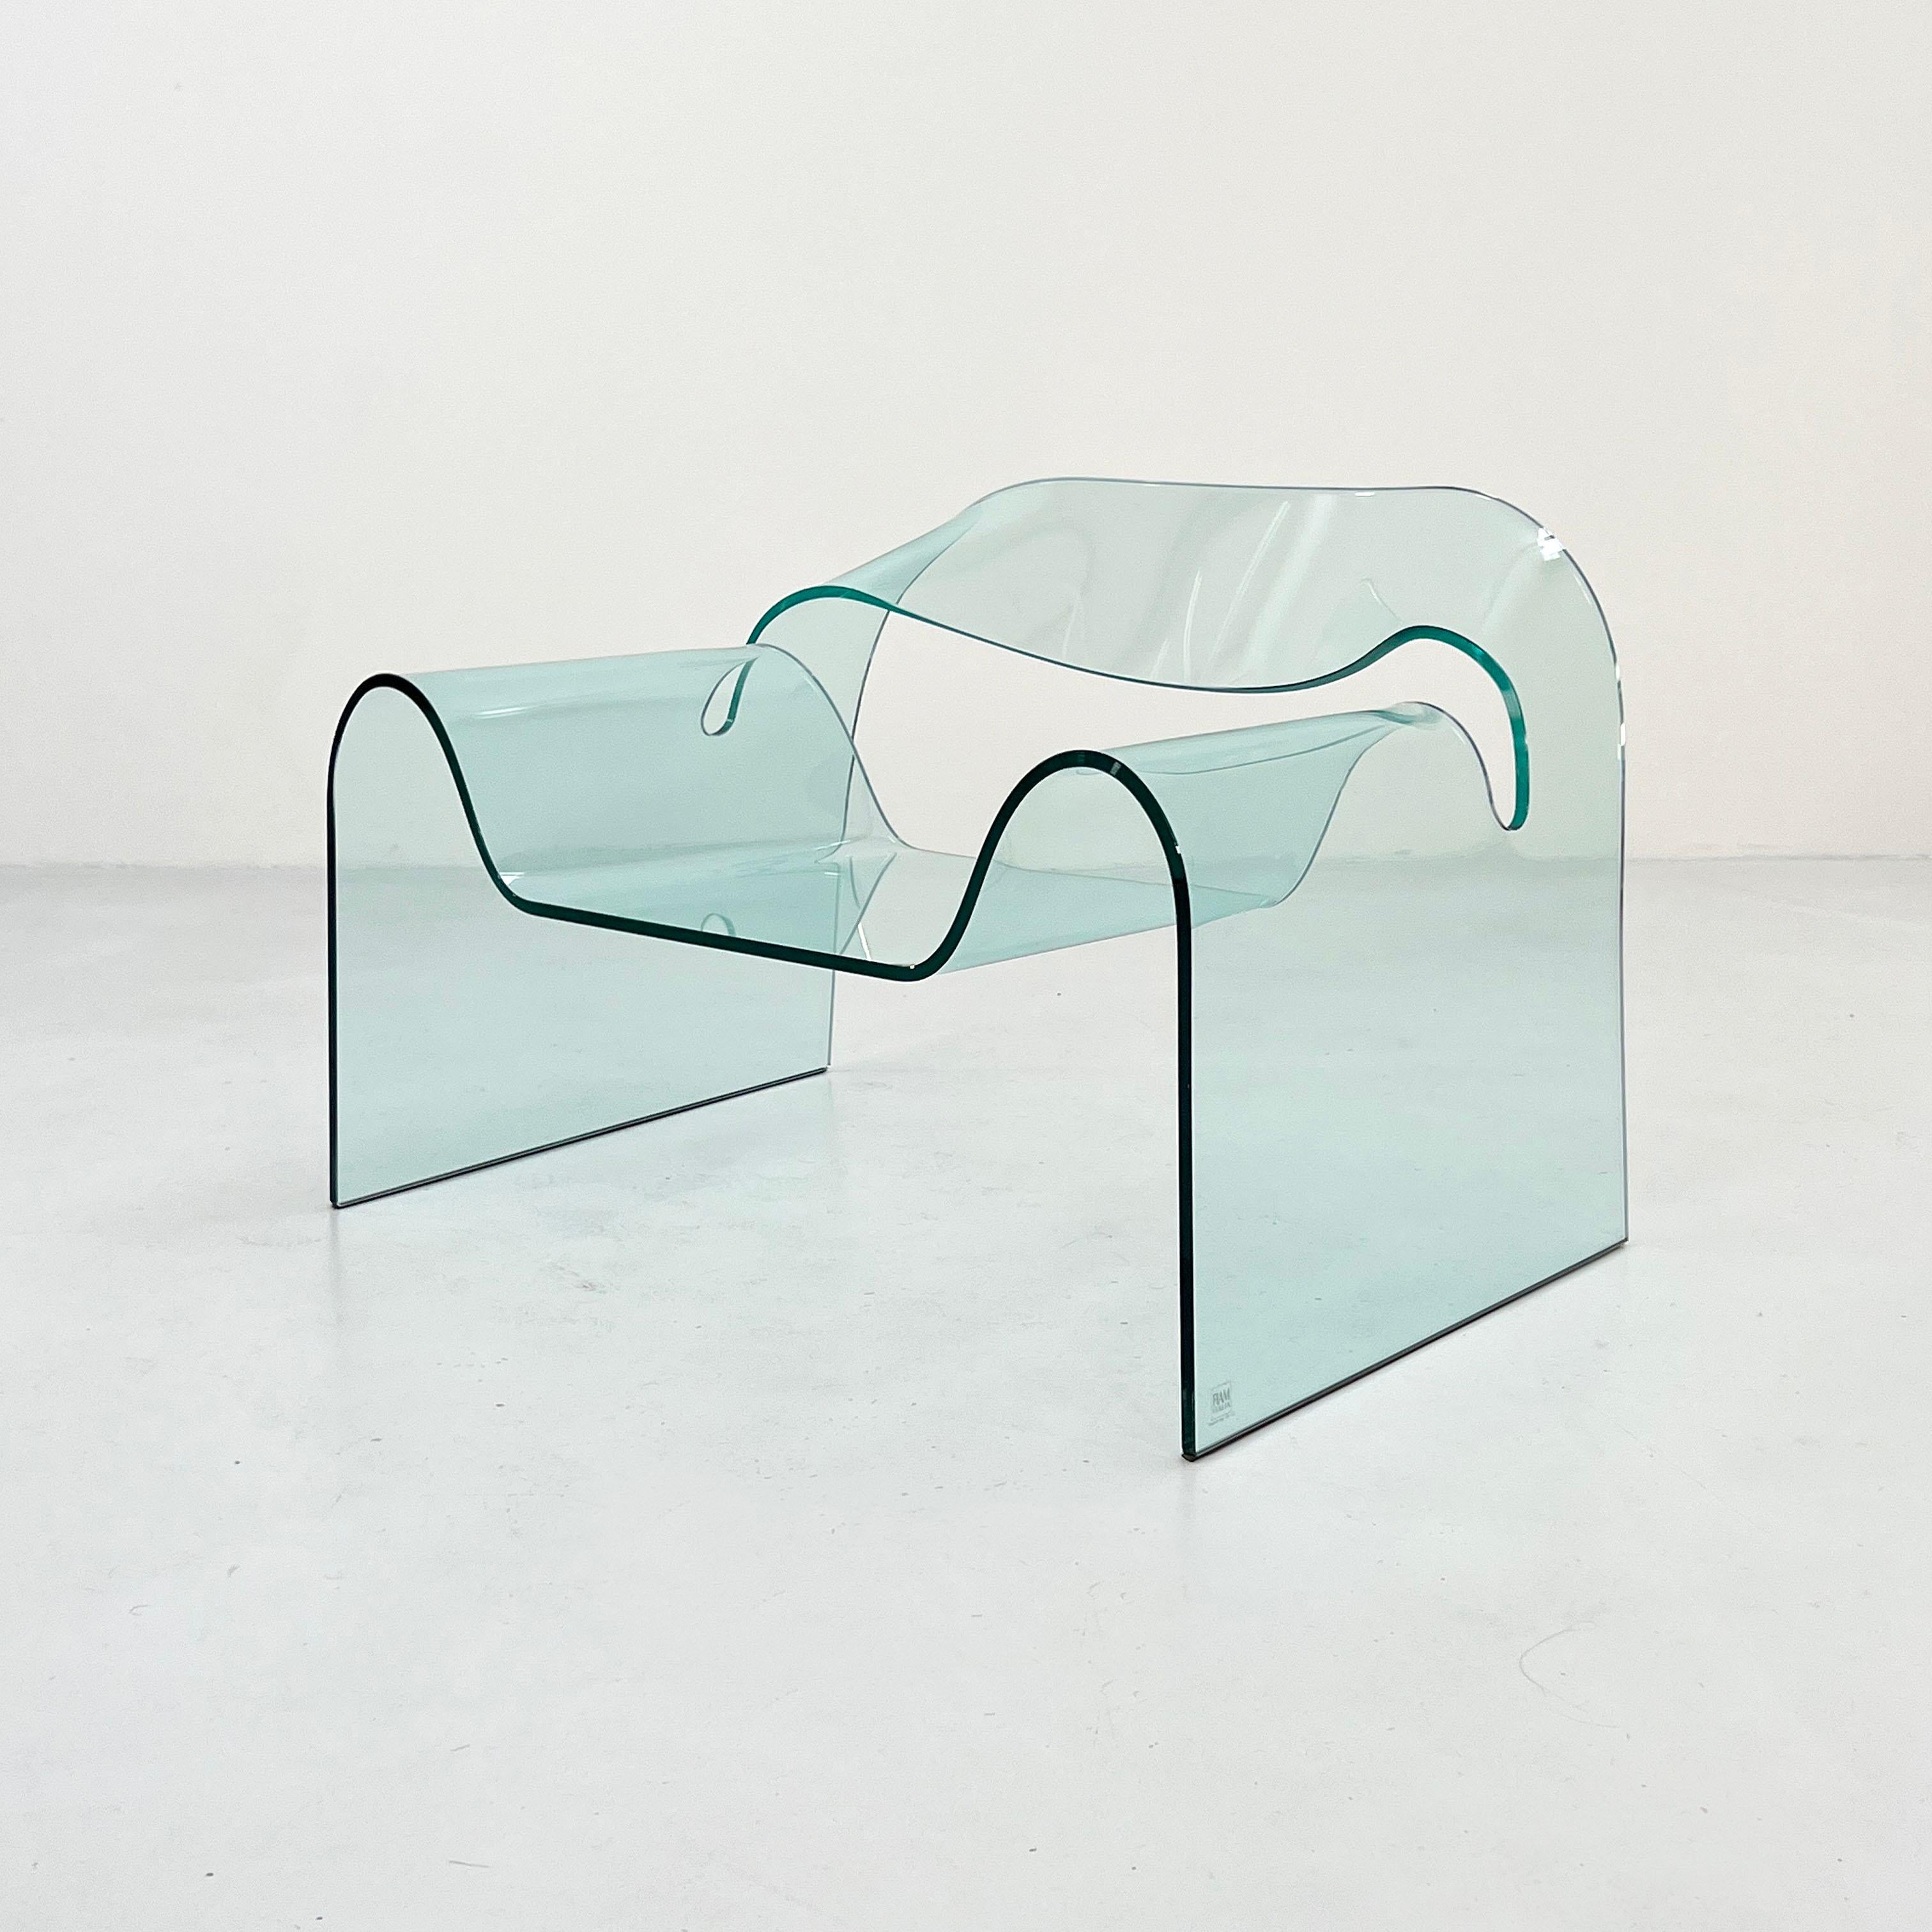 Designer - Cini Boeri
Producer - Fiam 
Model - Ghost Chair
Design Period - Nineties
Measurements - width 94 cm x depth 74 cm x height 62 cm x seat height 31 cm
Materials - glass
Color - clear
Light wear consistent with age and use.Condition - Good